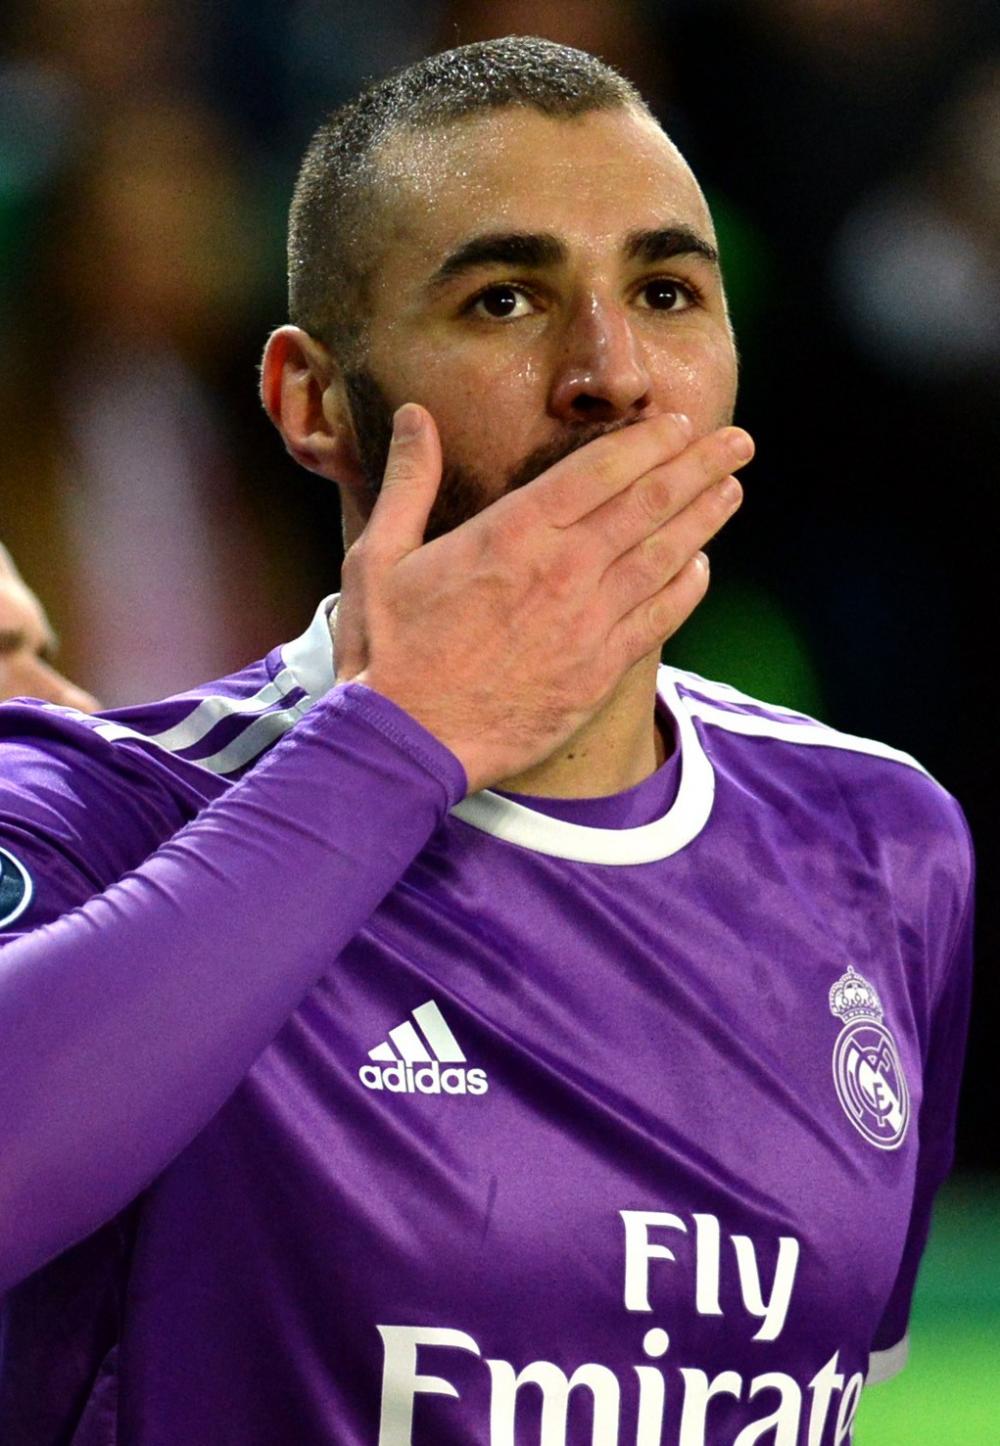 The Weekend Leader - France's Karim Benzema handed one-year suspended prison in sex tape case